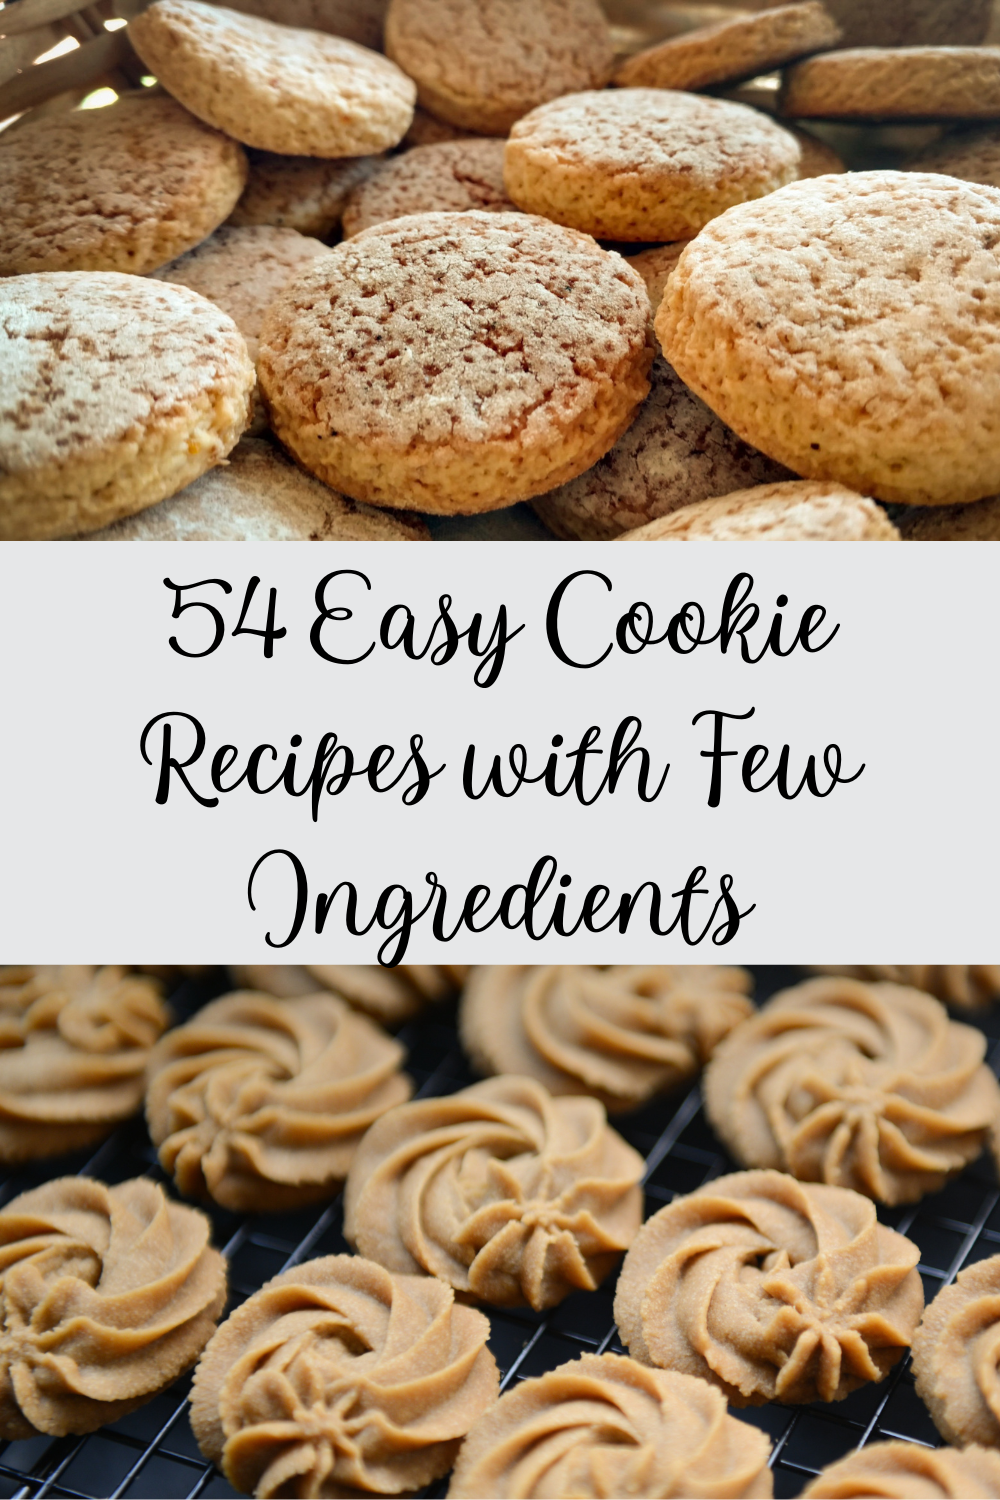 Easy Cookie Recipes with Few Ingredients